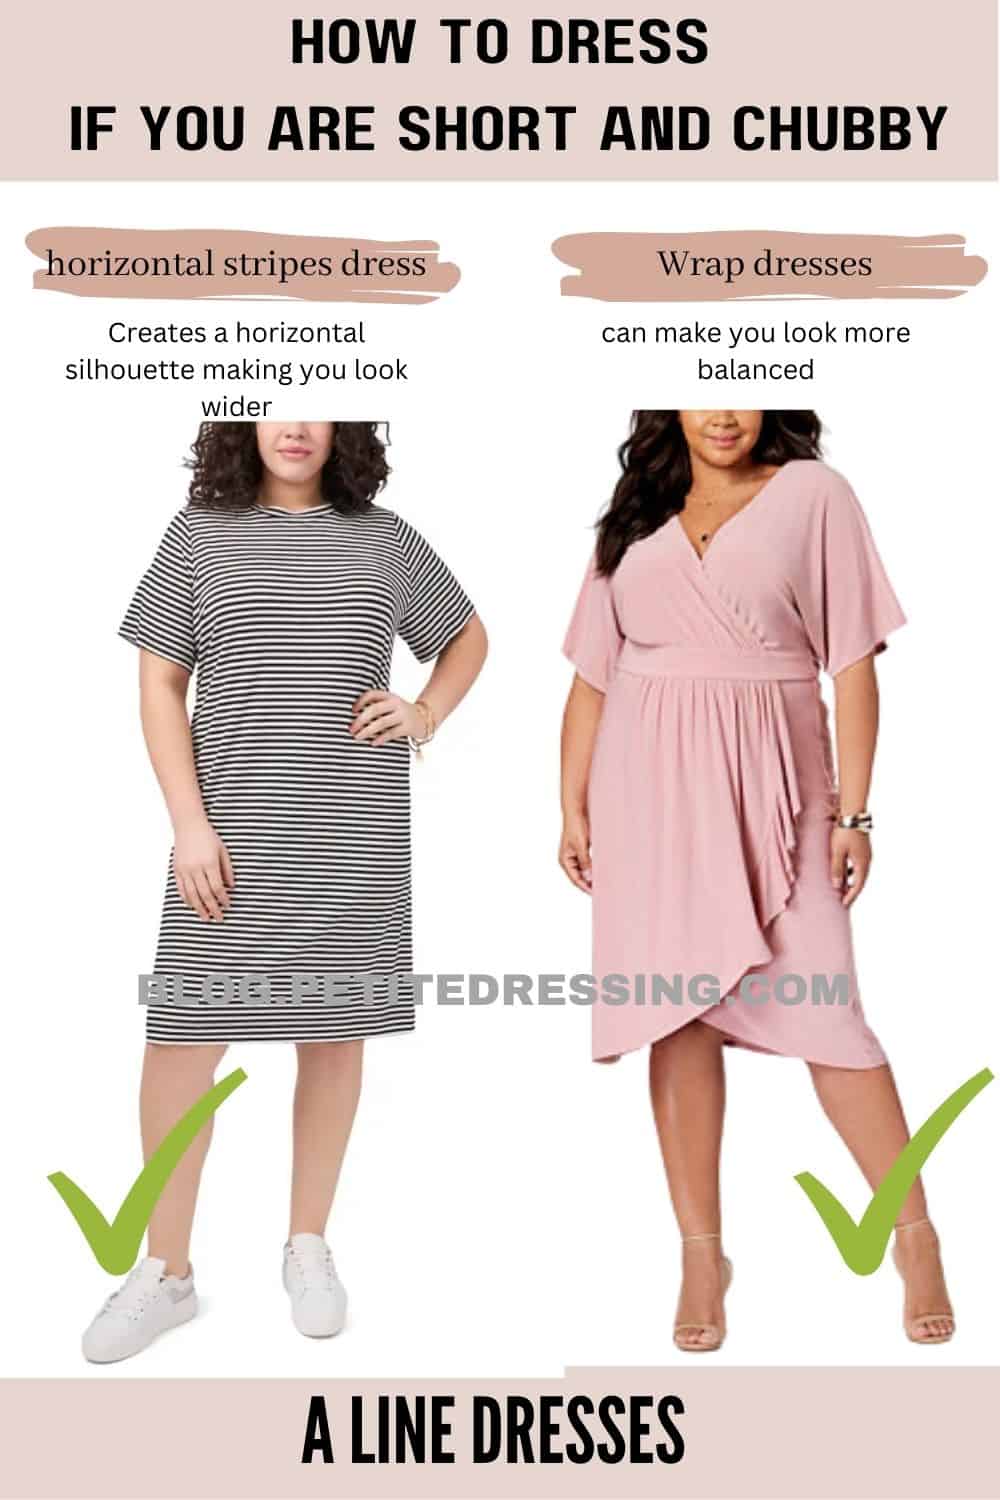 Ways Dress if you are Short and Chubby